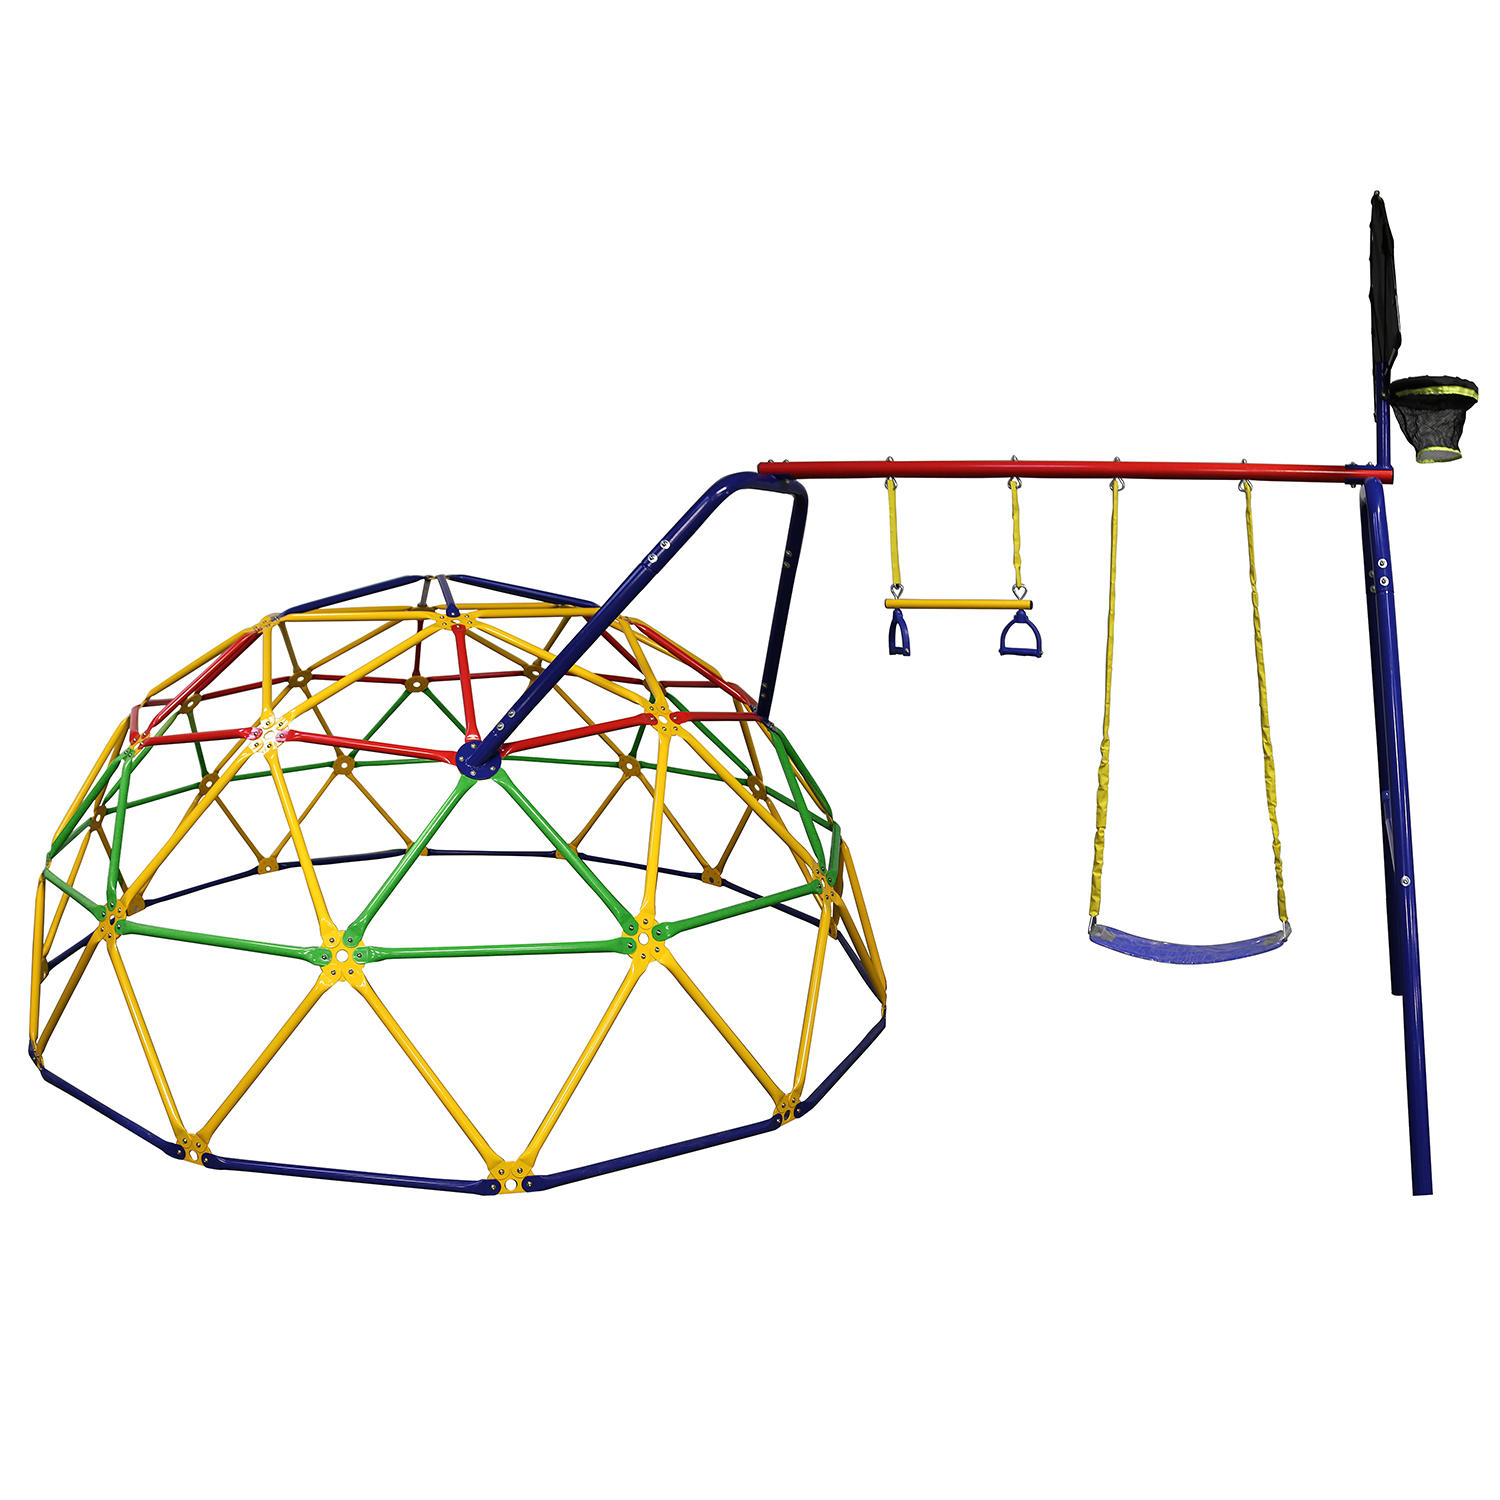 Skywalker Sports 10′ Geo Dome Climber with Swing Set Accessory